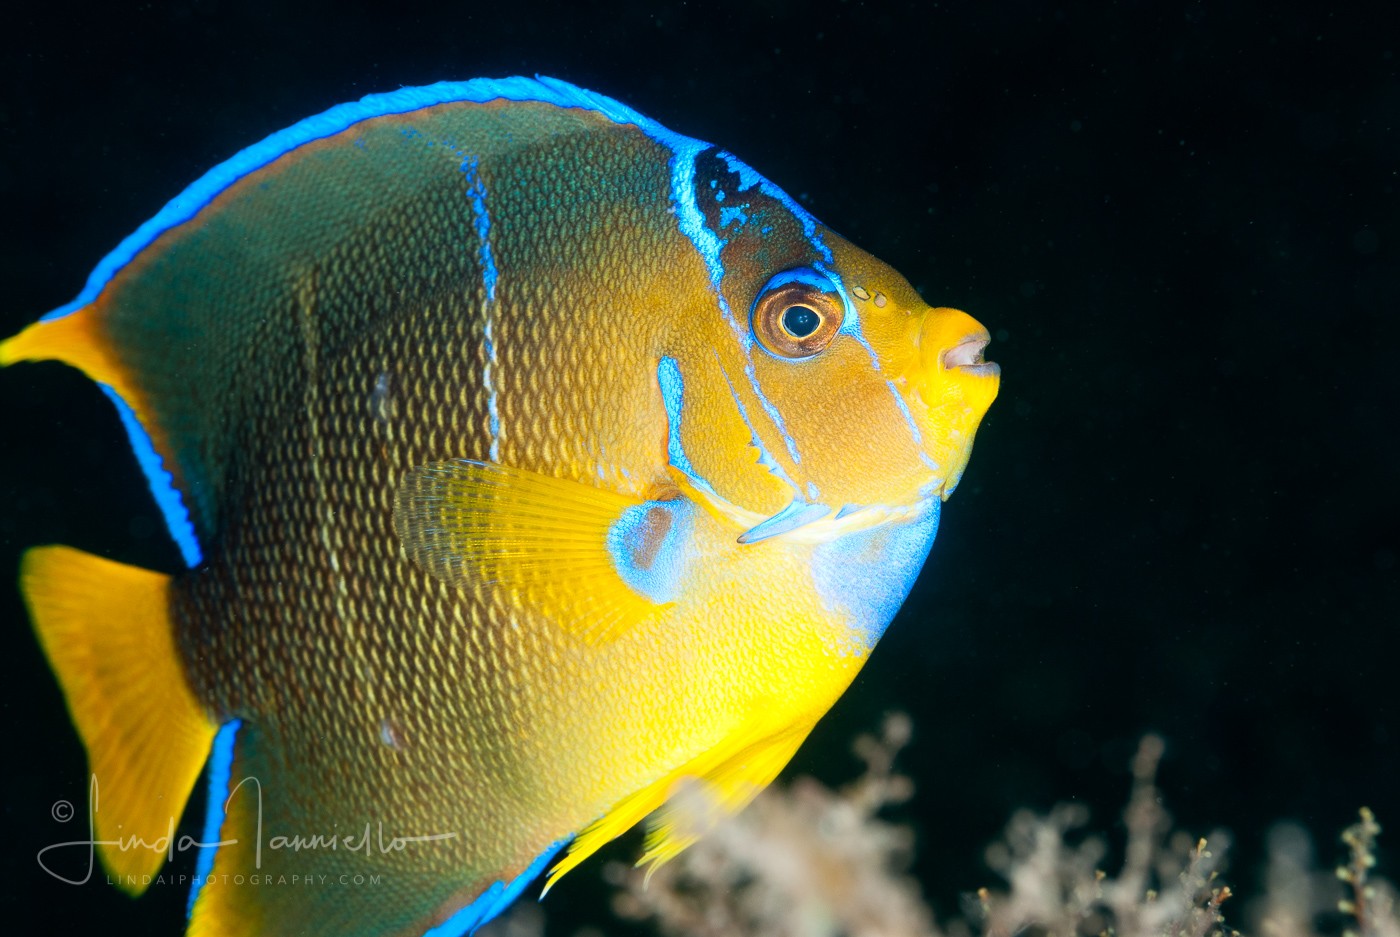 Possibly a Townsend Angelfish - Hybrid